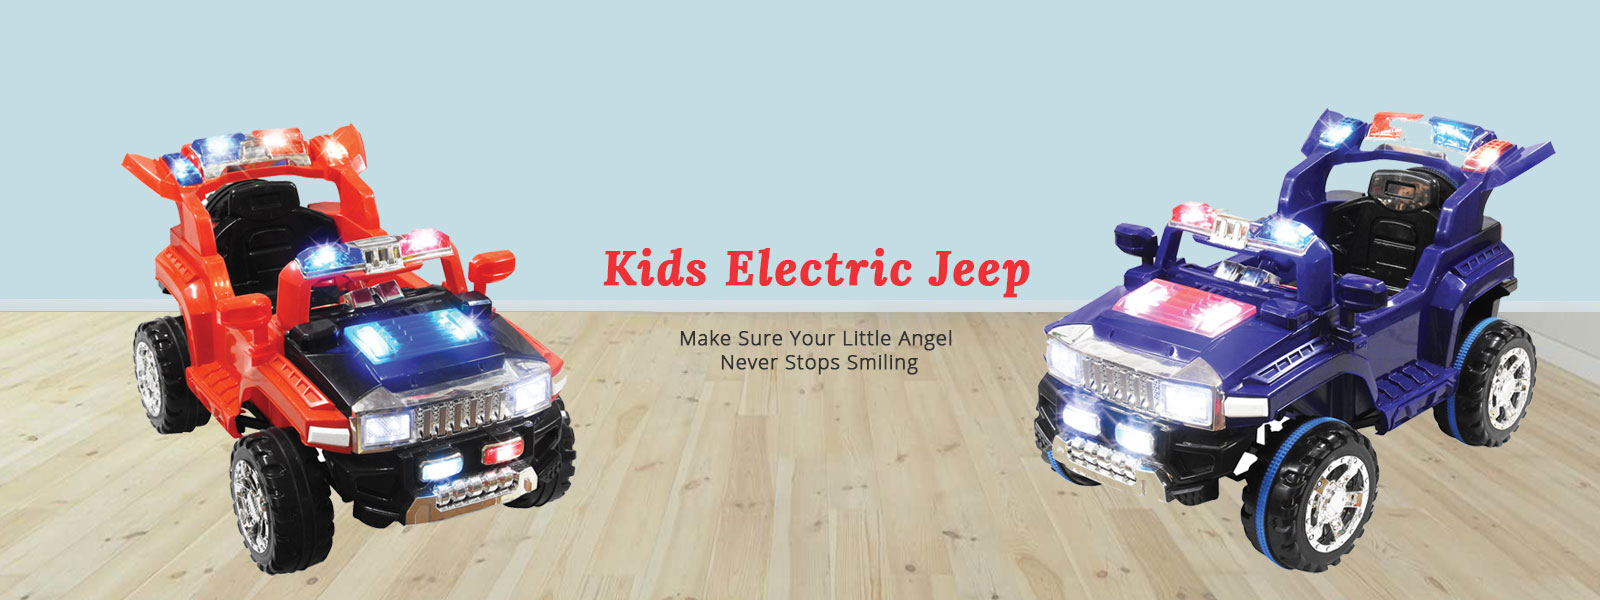 Kids Electric Jeep Manufacturers in Saharanpur